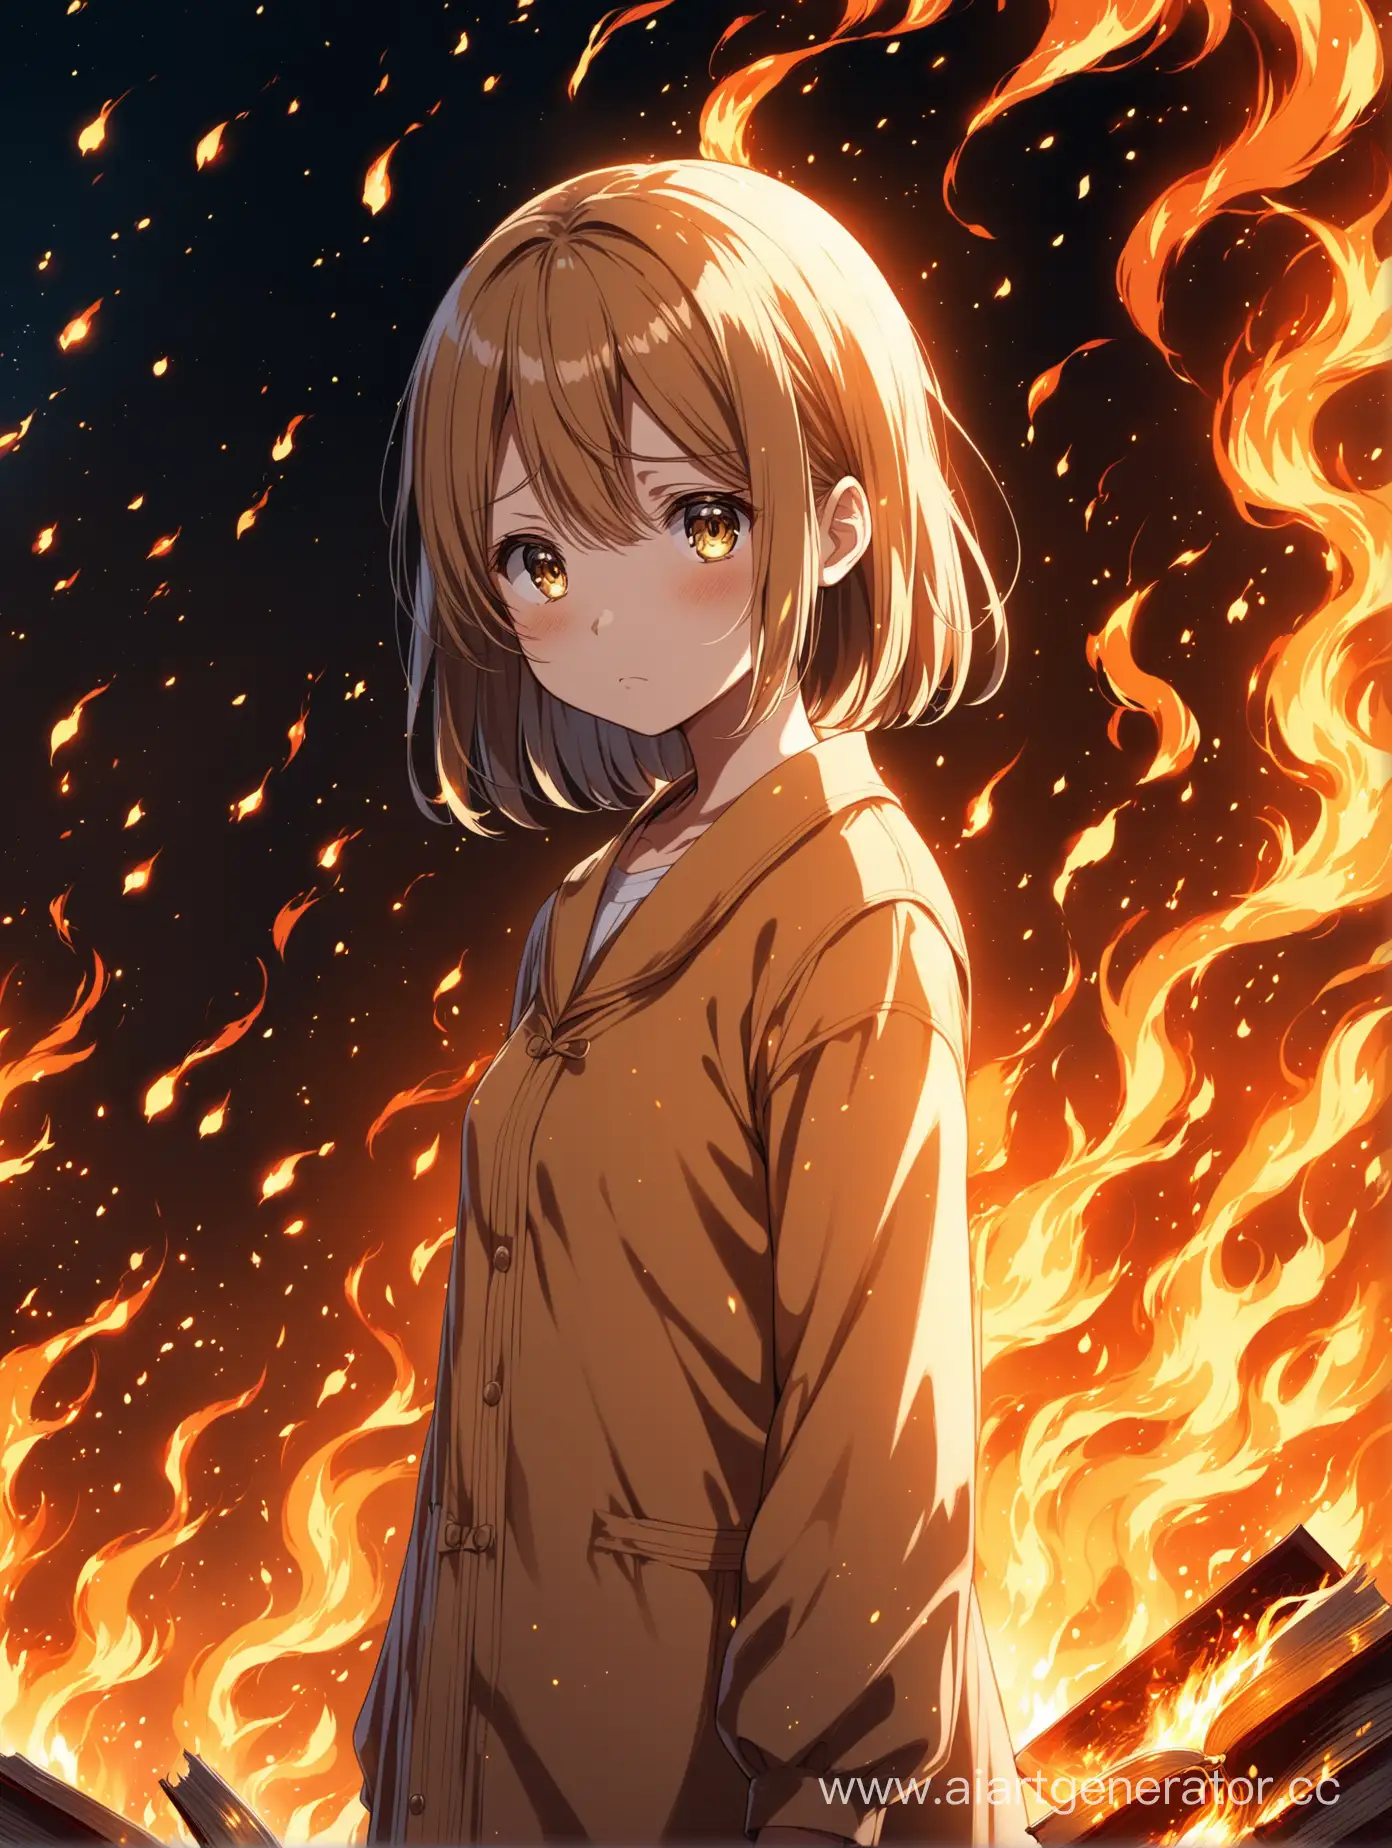 Melancholic-Anime-Girl-Standing-Amidst-Flames-Emotional-Book-Cover-Art